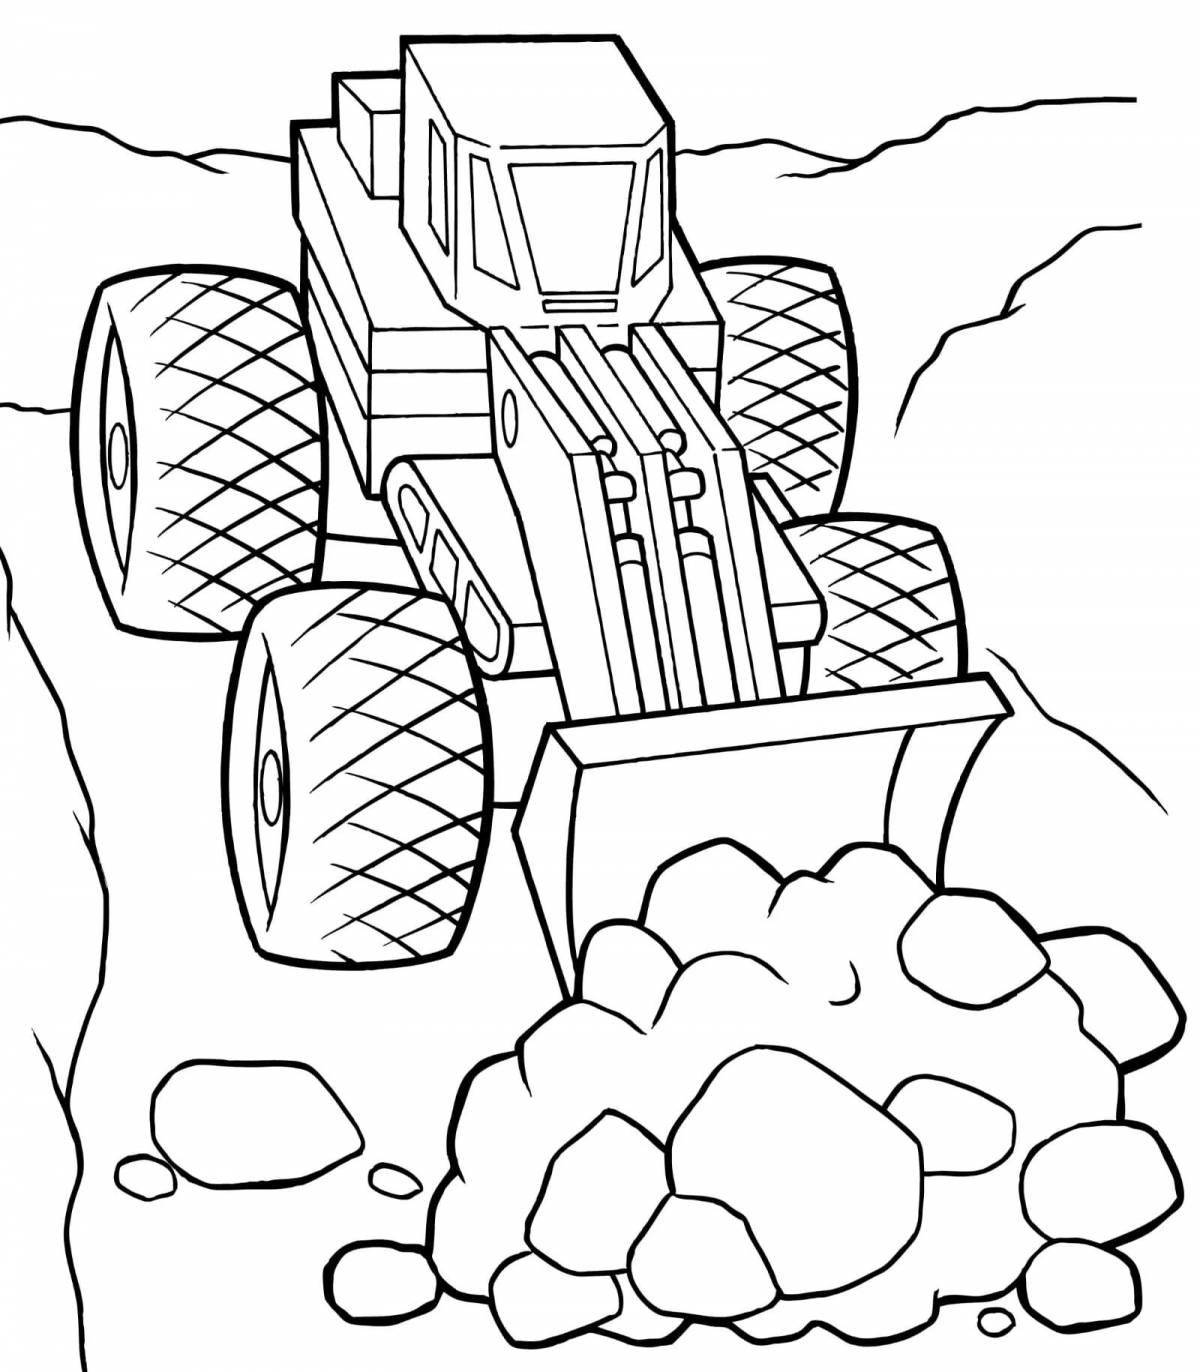 Outstanding snow plow coloring page for kids